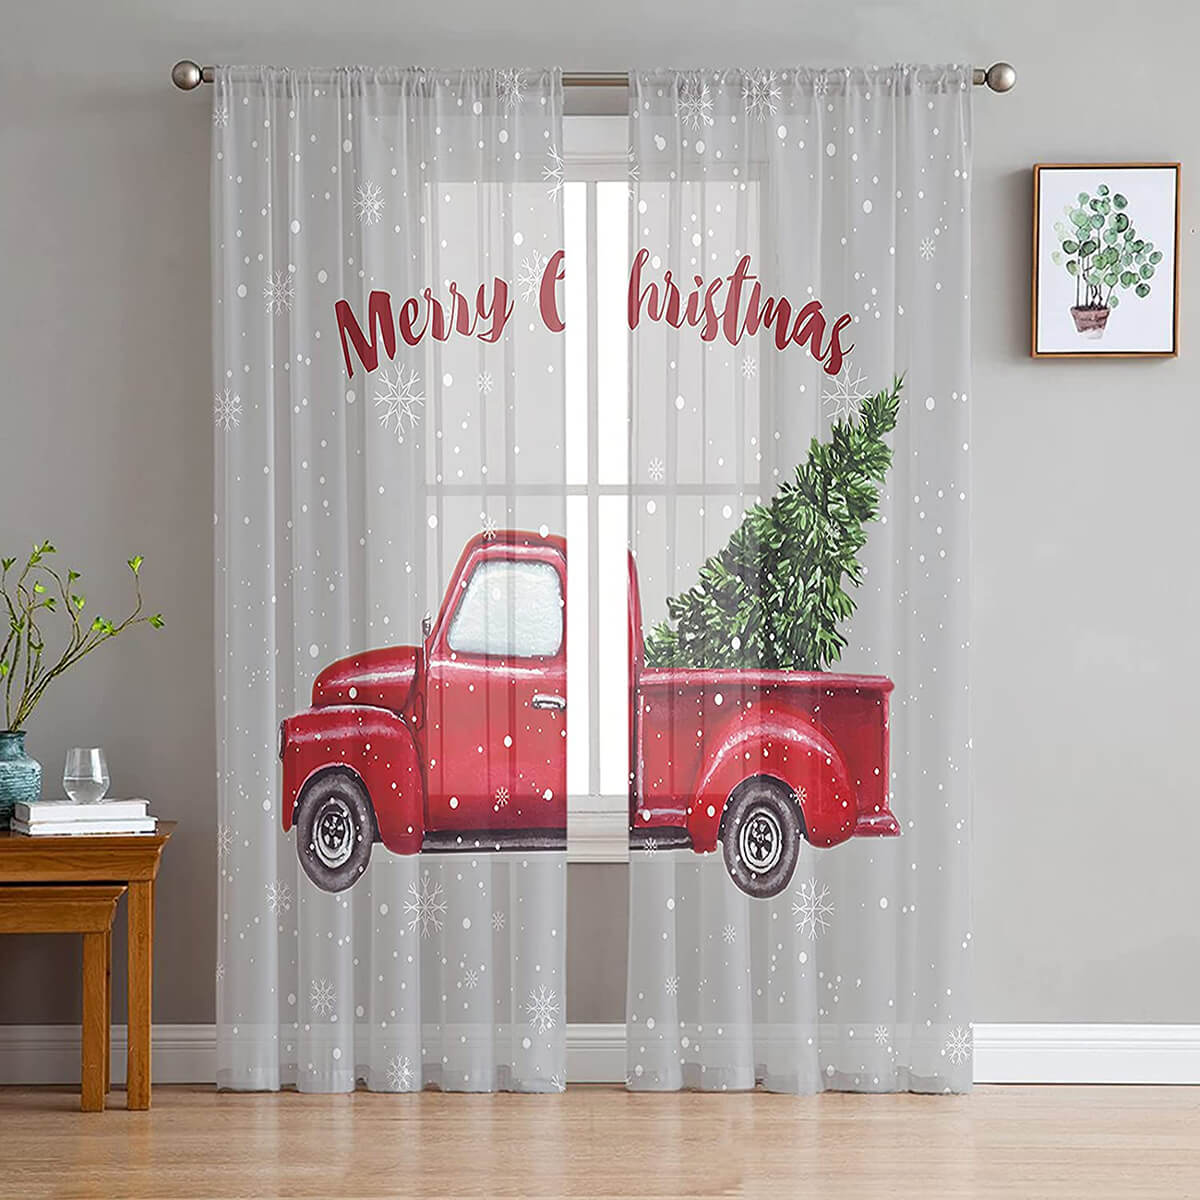 Translucent Tulle Red Pickup Truck Curtain Panels